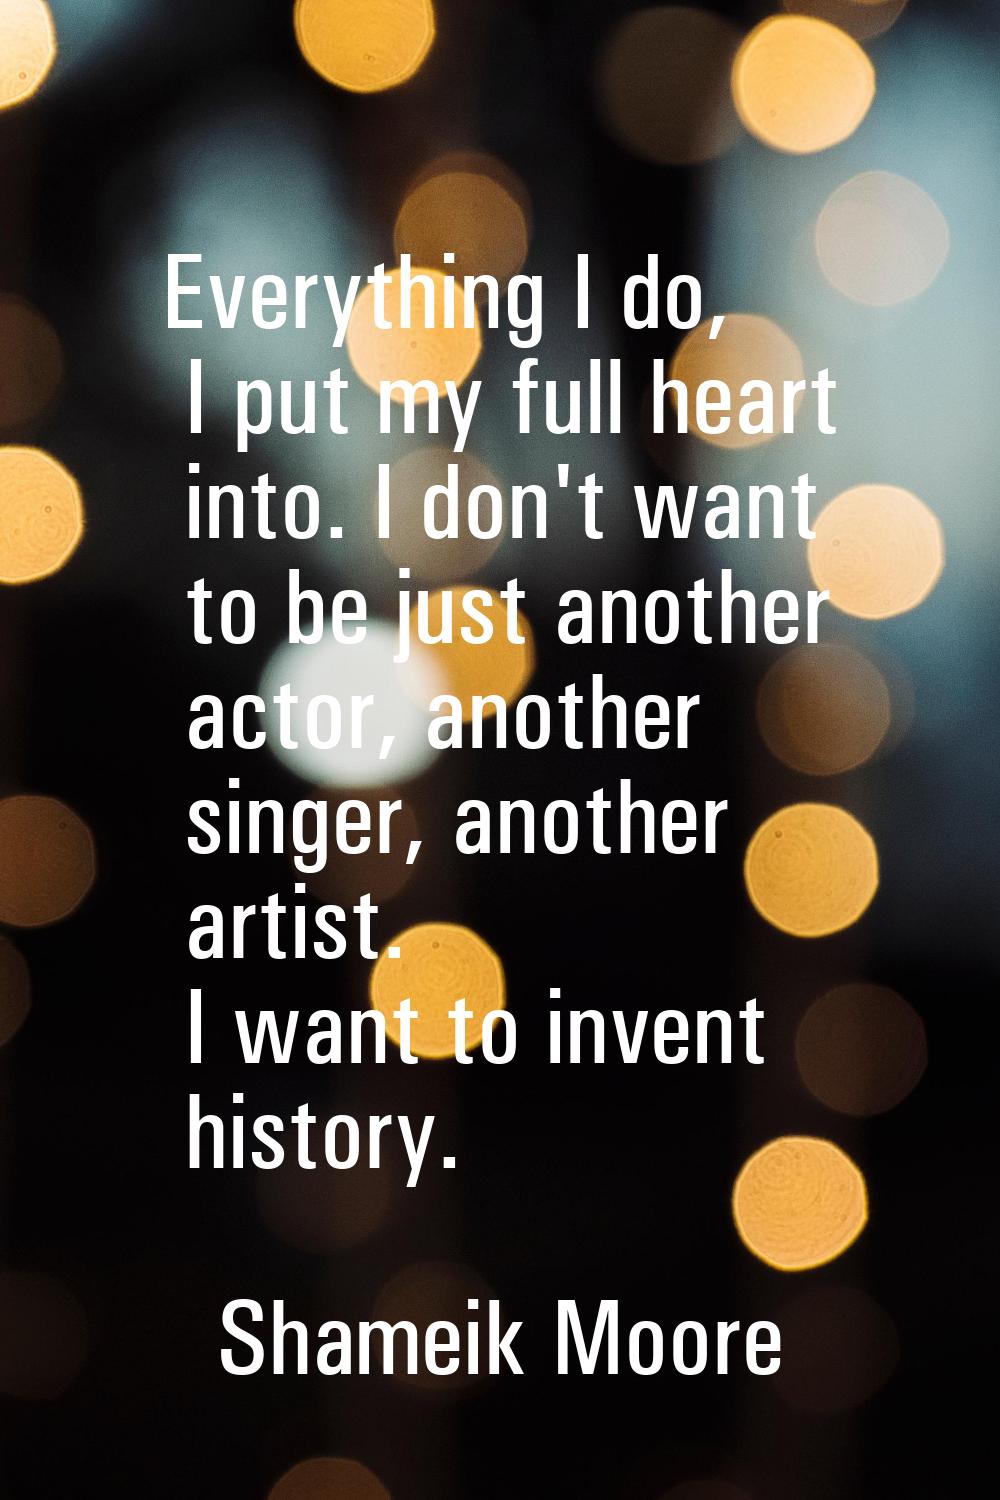 Everything I do, I put my full heart into. I don't want to be just another actor, another singer, a